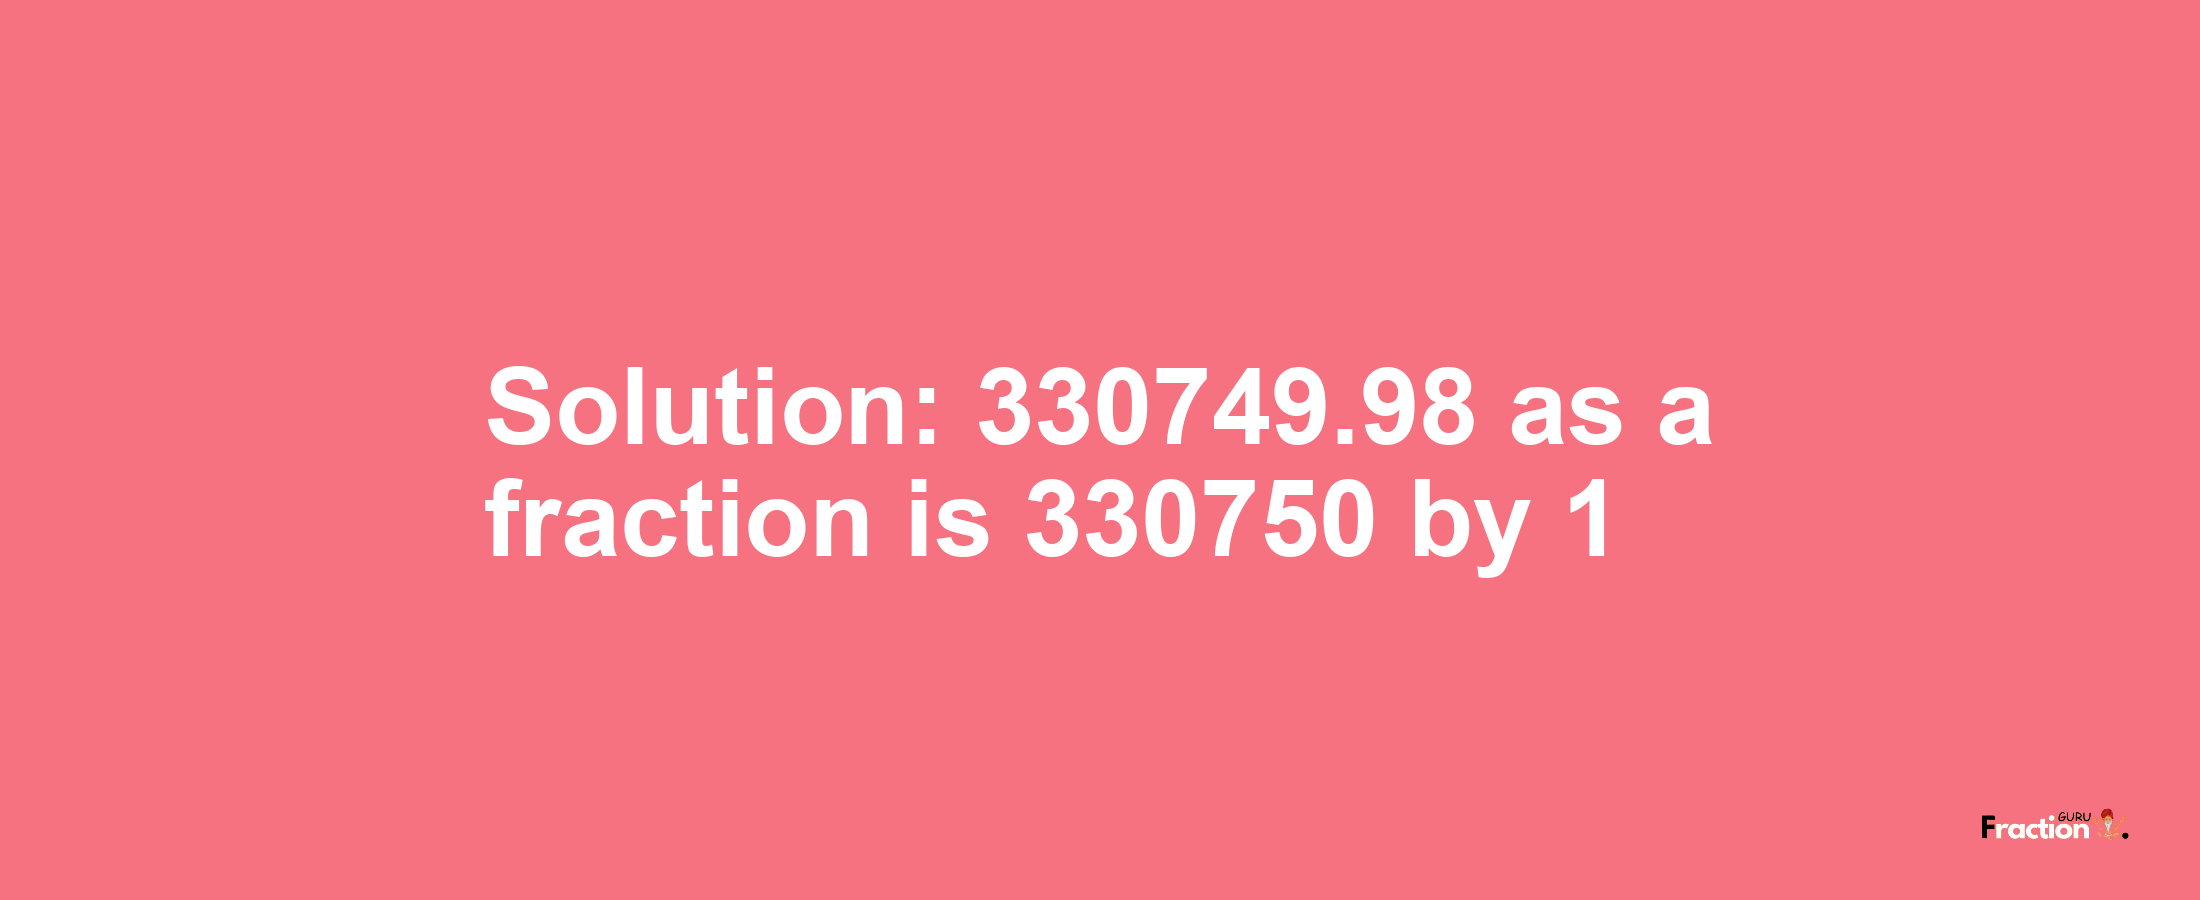 Solution:330749.98 as a fraction is 330750/1